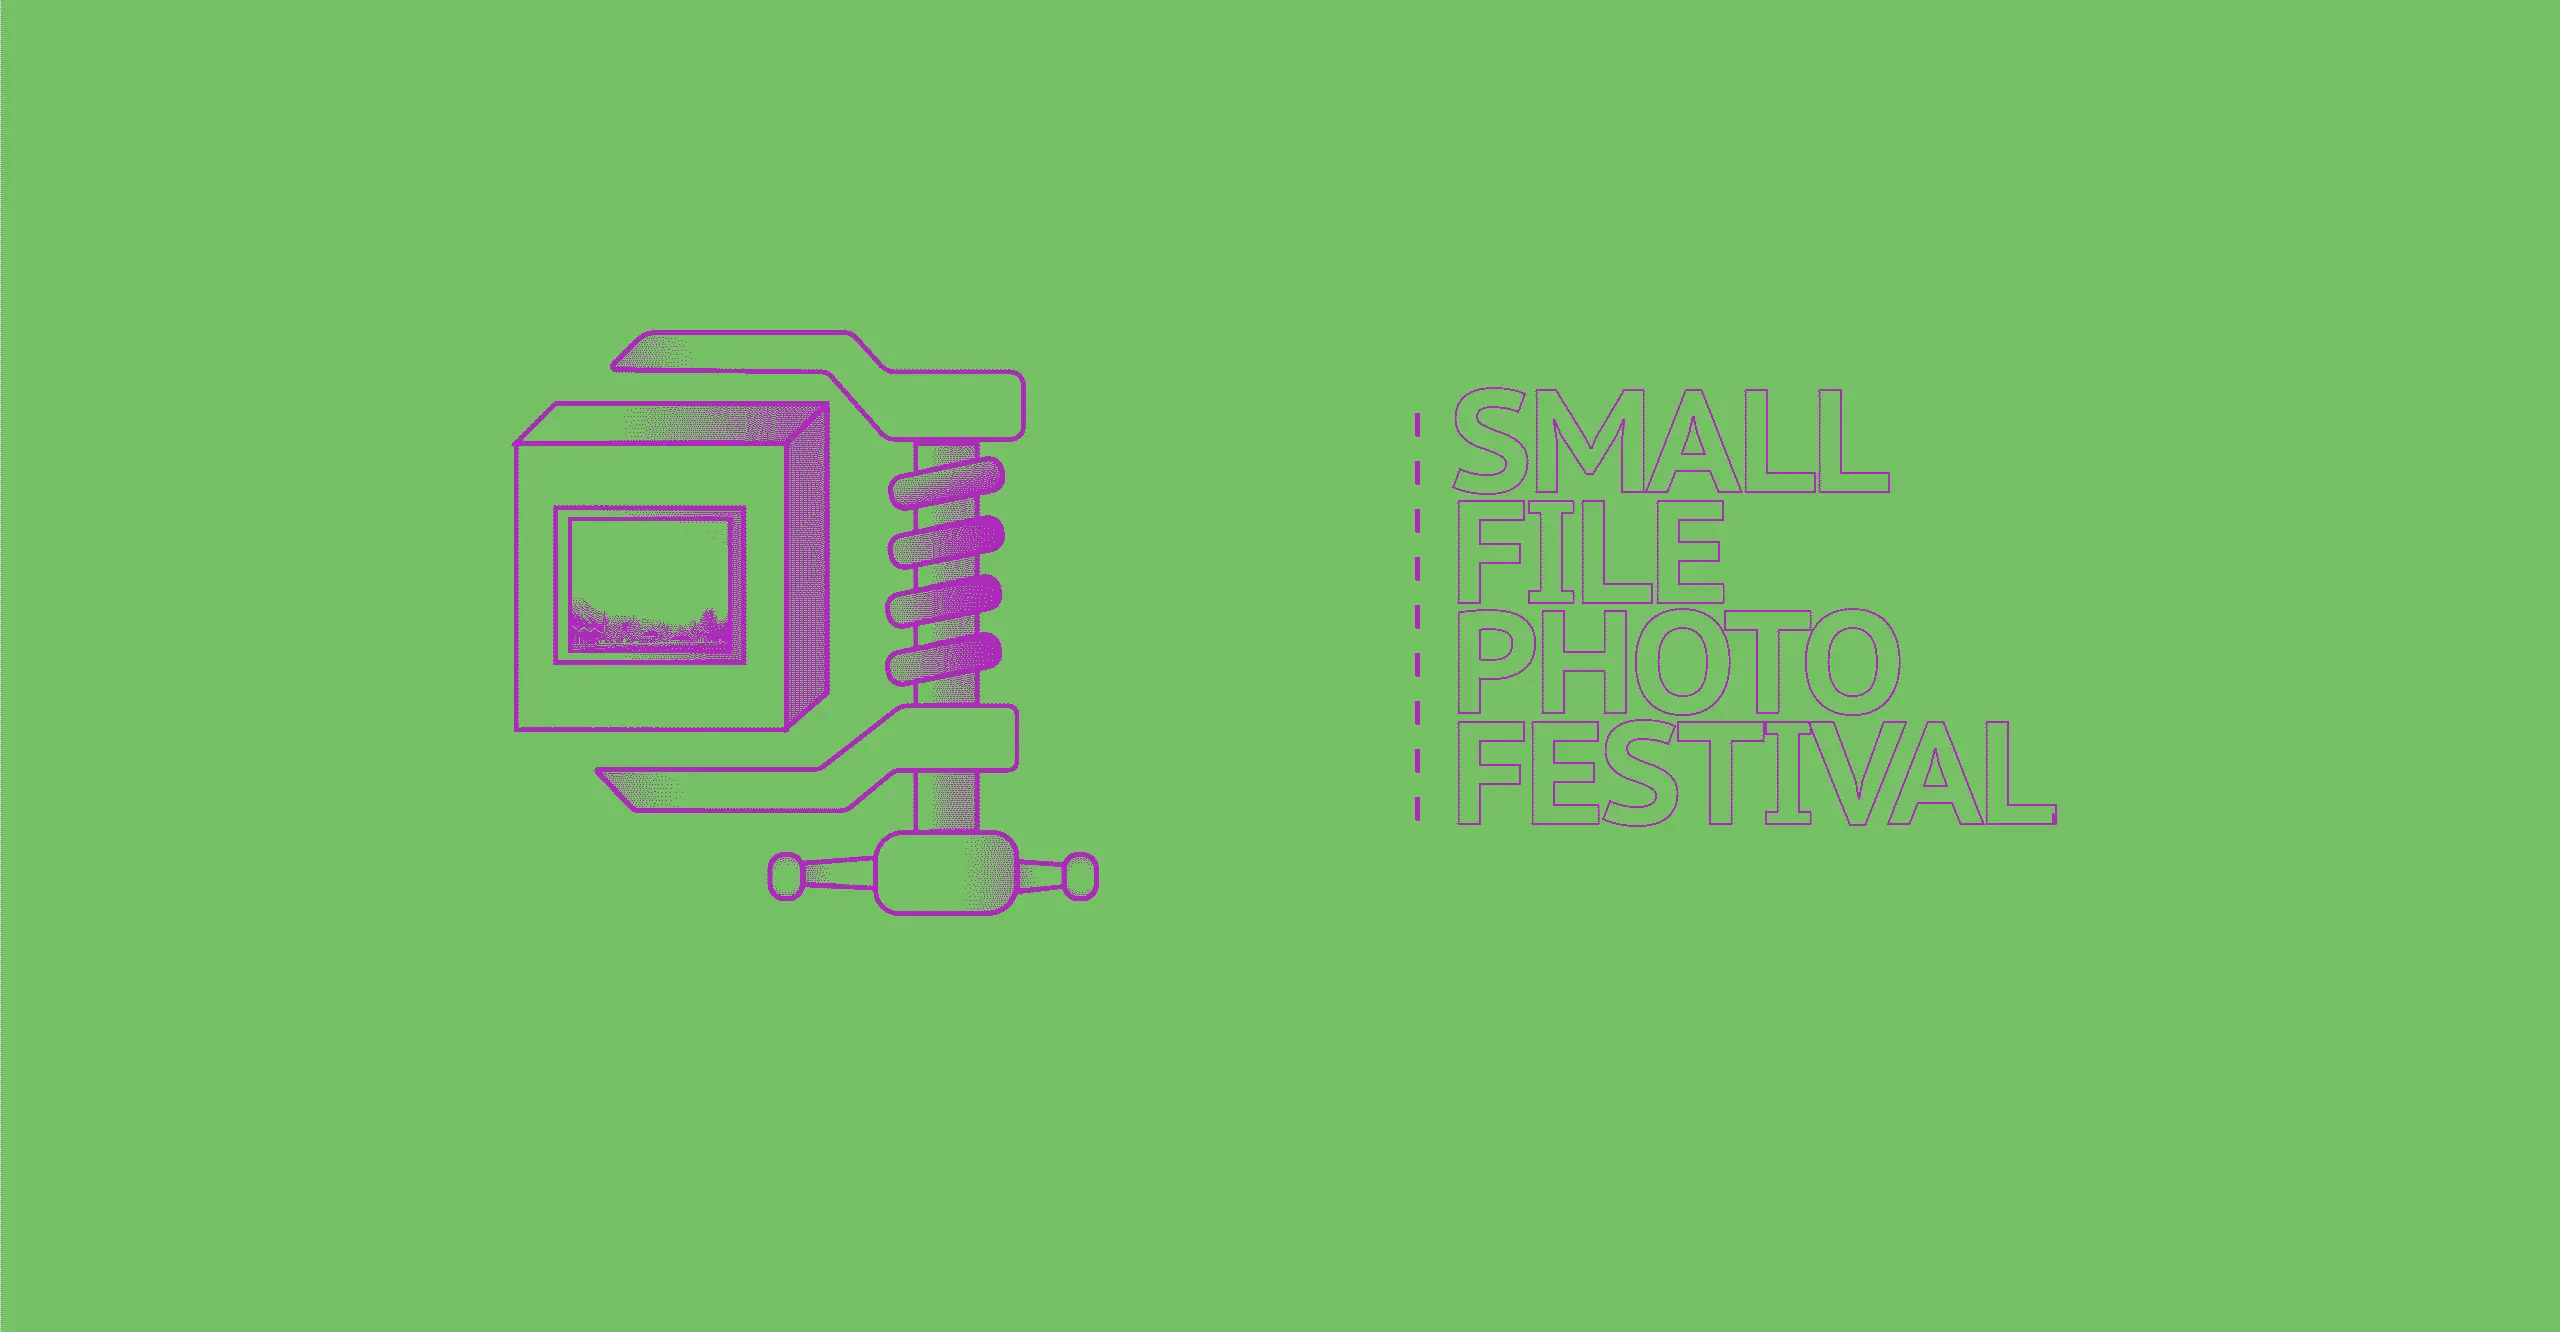 A clamp holding box that contains a photograph of landscape. "Small File Photo Festival"